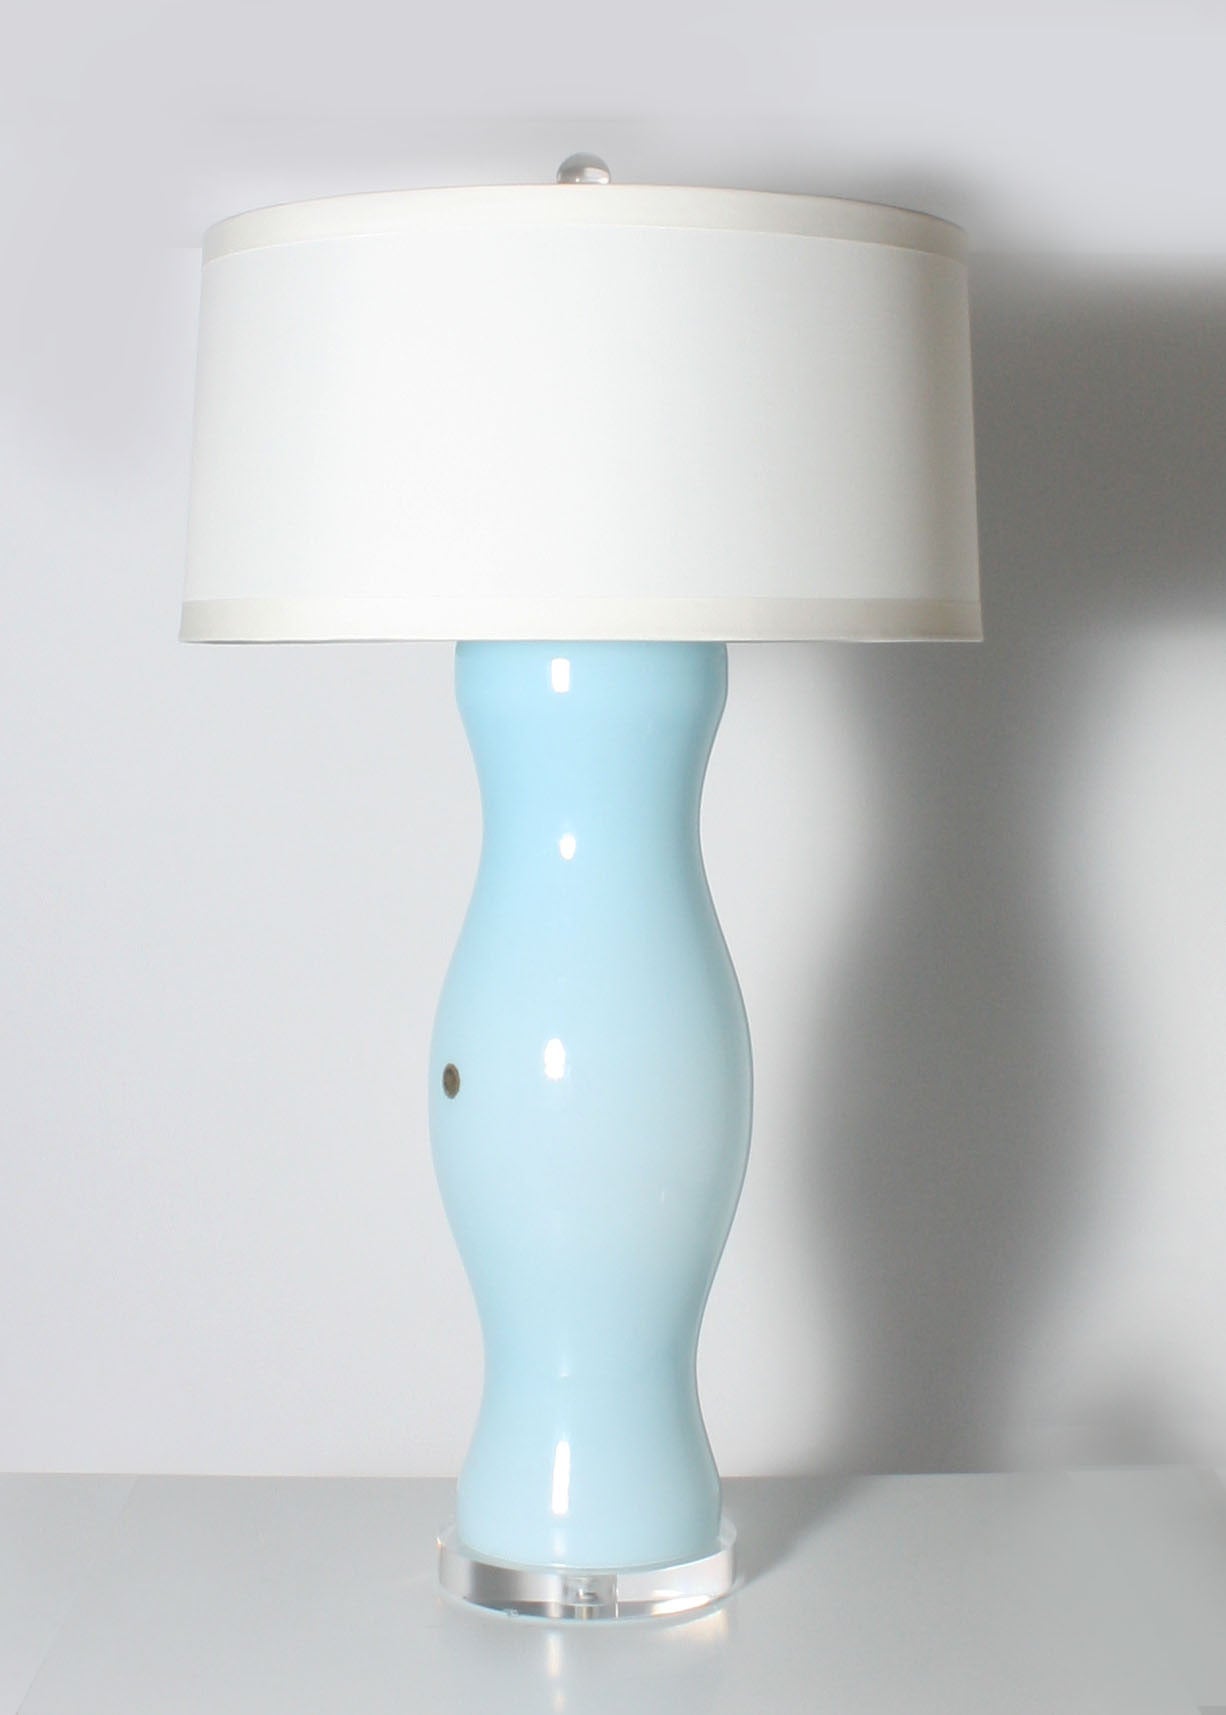 Pair of rare incamiciato Cappellini Venini lamps with original factory sticker. Very tall lamps, great size for a large living room or seating area. Off-white pongee shades. 3 way socket, 50/100/150 watt. Nickel hardware. Lucite base. Crystal ball